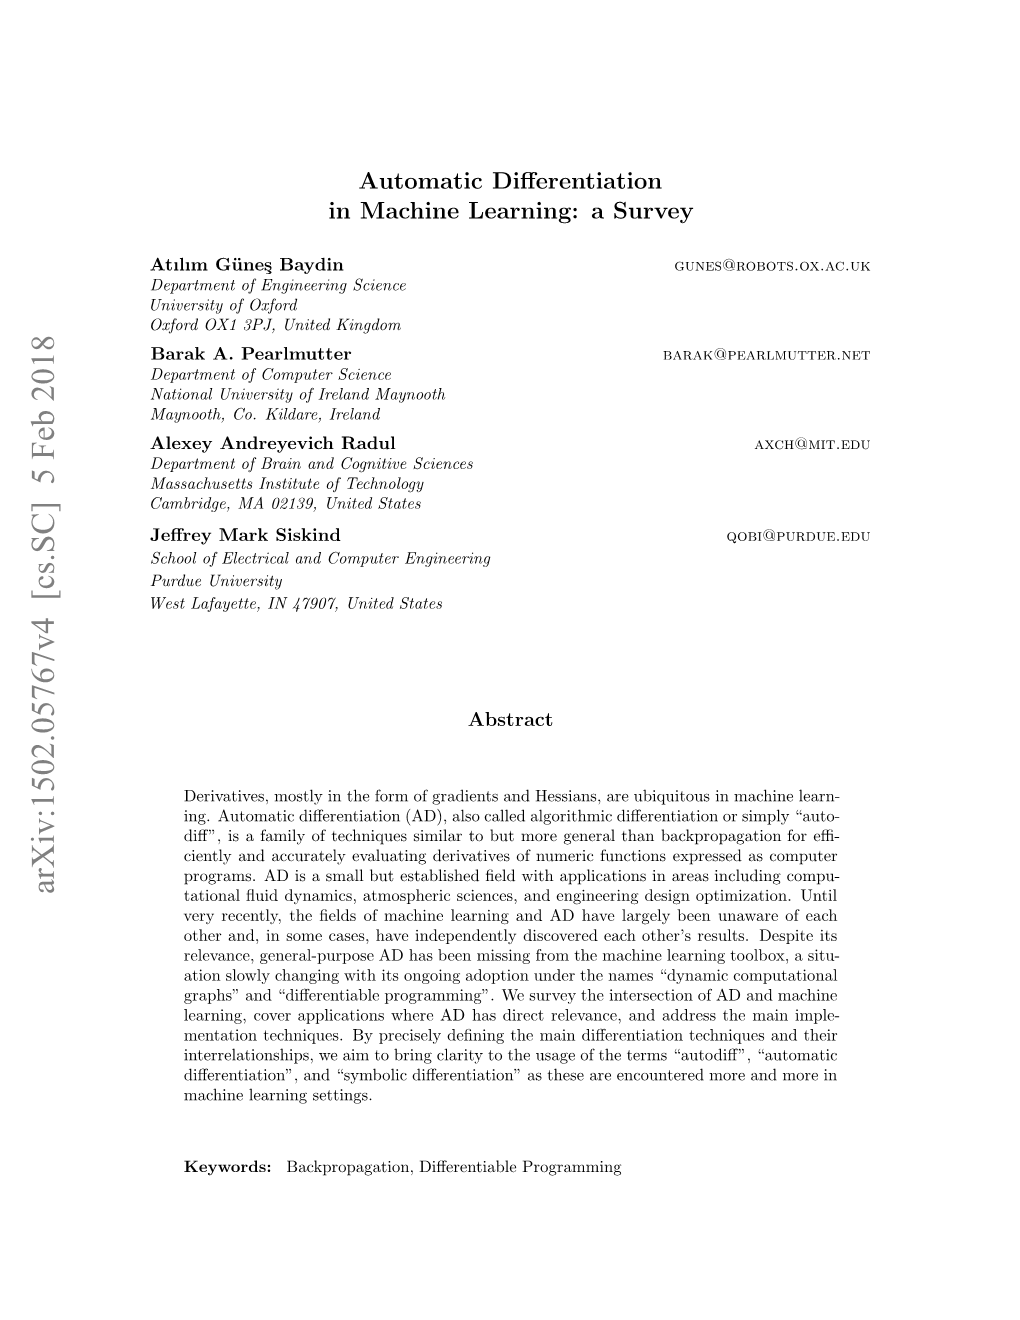 Automatic Differentiation in Machine Learning: a Survey